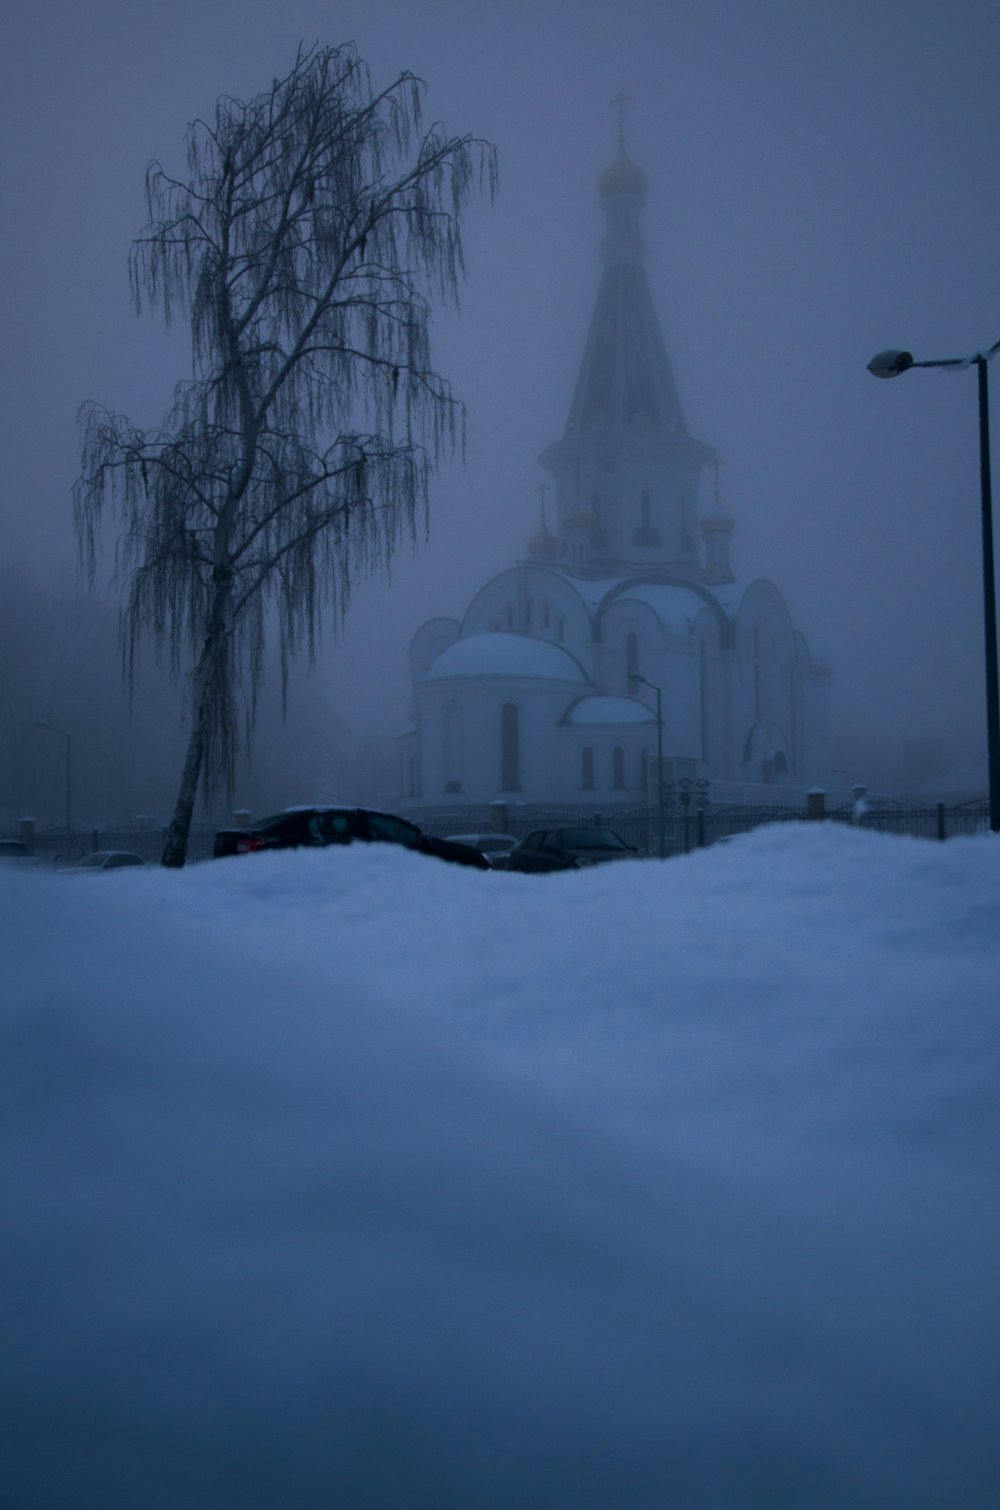 a church in the snow with a tree in the foreground